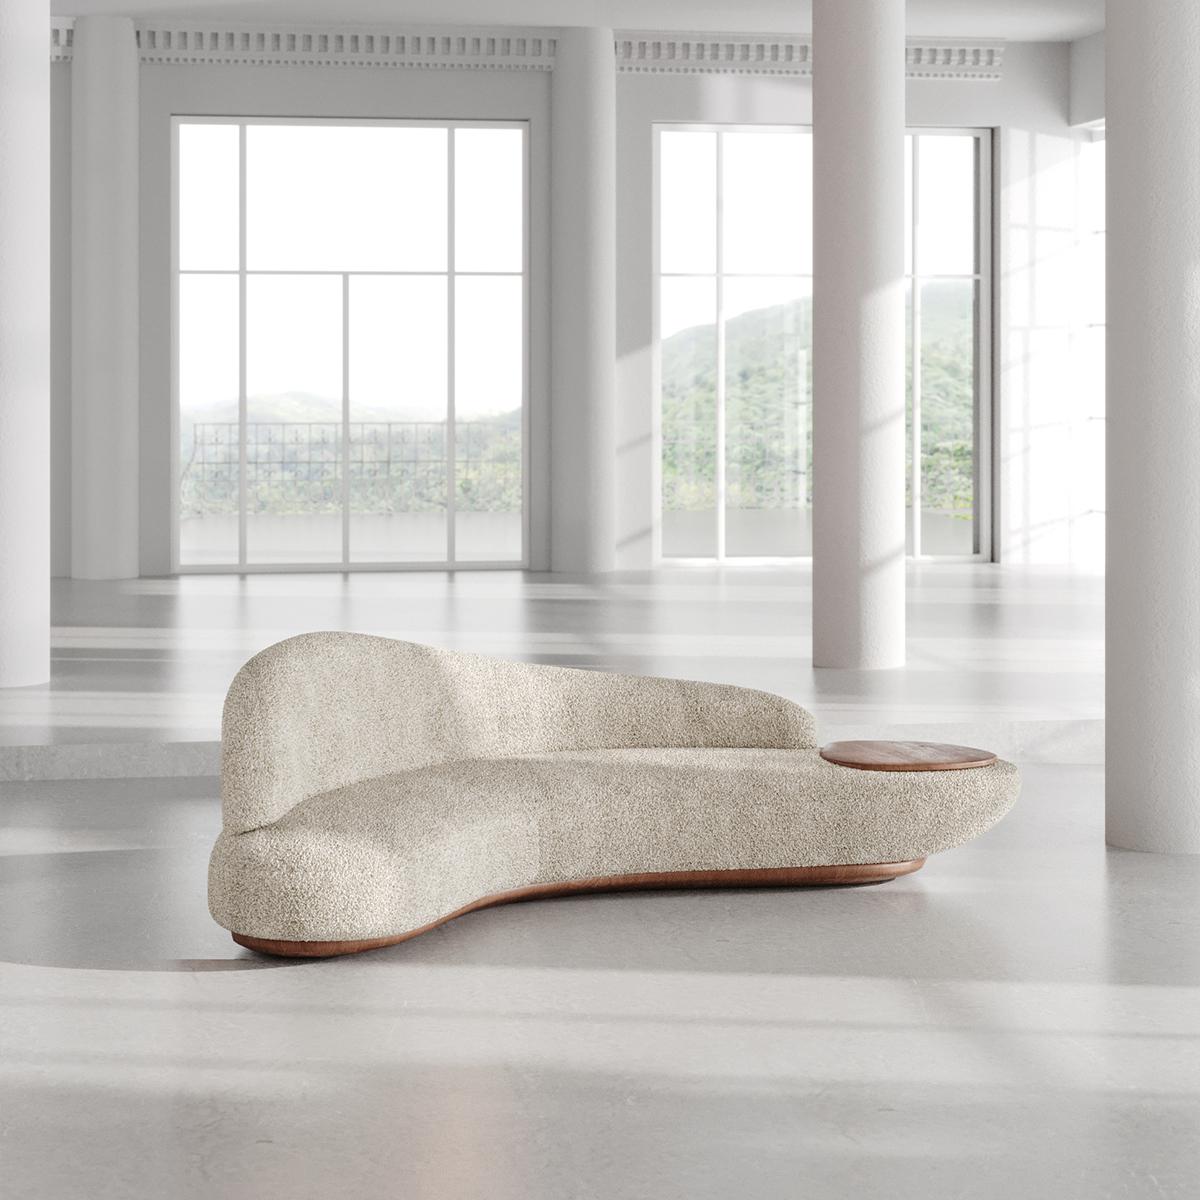 Inspired by the dunes and warm colors of the African deserts, this sofa was created from curves full of elegance, capable of embracing our body and creating a unique feeling of comfort. A peculiar and bold design that includes its very own oasis, an